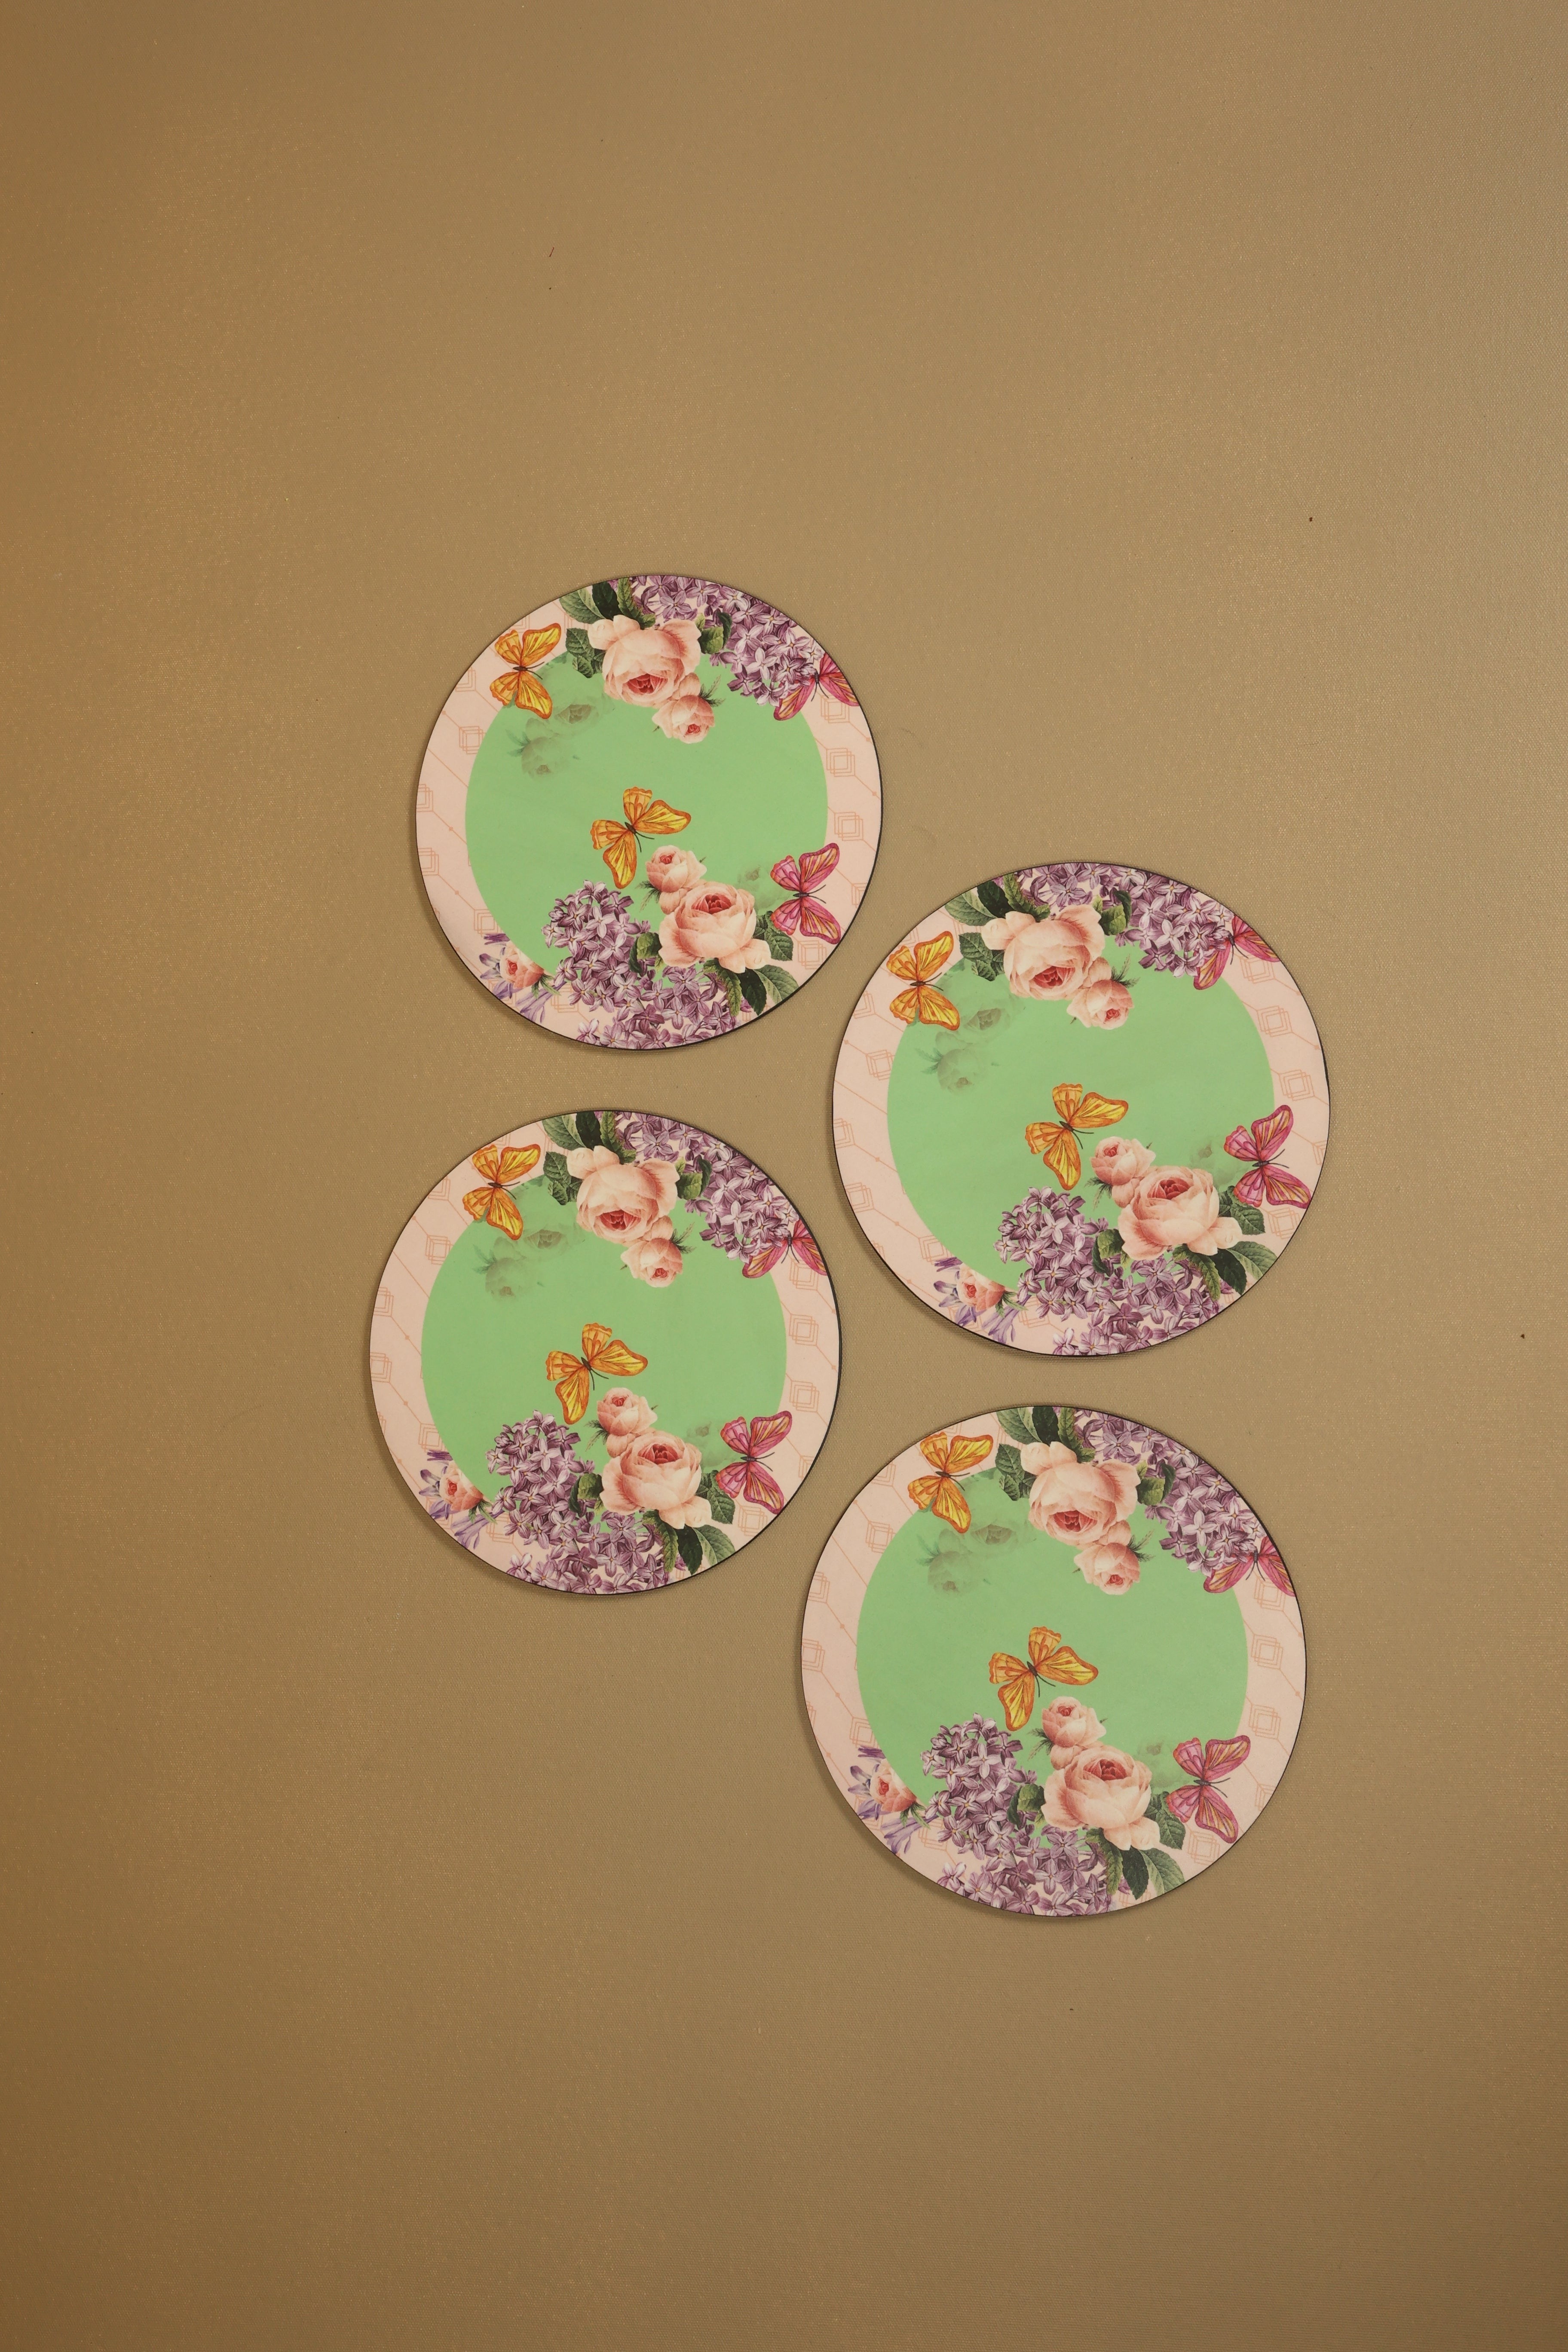 Groovy Mint Series Round Trivets - Set of 6